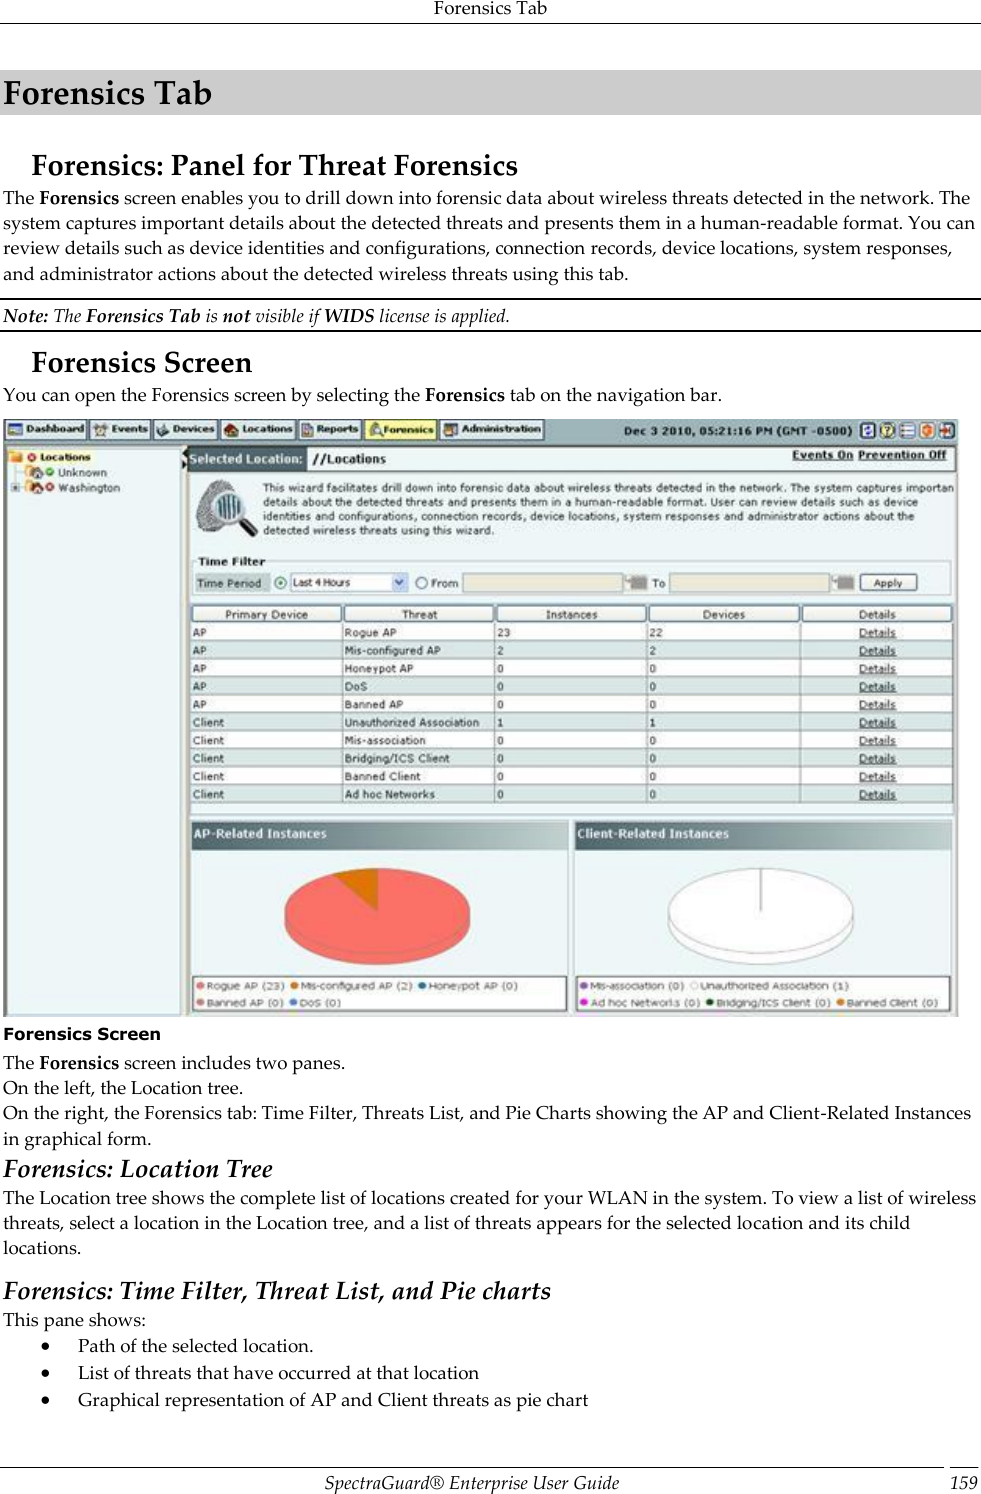 Forensics Tab SpectraGuard®  Enterprise User Guide 159 Forensics Tab Forensics: Panel for Threat Forensics The Forensics screen enables you to drill down into forensic data about wireless threats detected in the network. The system captures important details about the detected threats and presents them in a human-readable format. You can review details such as device identities and configurations, connection records, device locations, system responses, and administrator actions about the detected wireless threats using this tab. Note: The Forensics Tab is not visible if WIDS license is applied. Forensics Screen You can open the Forensics screen by selecting the Forensics tab on the navigation bar.  Forensics Screen The Forensics screen includes two panes. On the left, the Location tree. On the right, the Forensics tab: Time Filter, Threats List, and Pie Charts showing the AP and Client-Related Instances in graphical form. Forensics: Location Tree The Location tree shows the complete list of locations created for your WLAN in the system. To view a list of wireless threats, select a location in the Location tree, and a list of threats appears for the selected location and its child locations. Forensics: Time Filter, Threat List, and Pie charts This pane shows:  Path of the selected location.  List of threats that have occurred at that location  Graphical representation of AP and Client threats as pie chart 